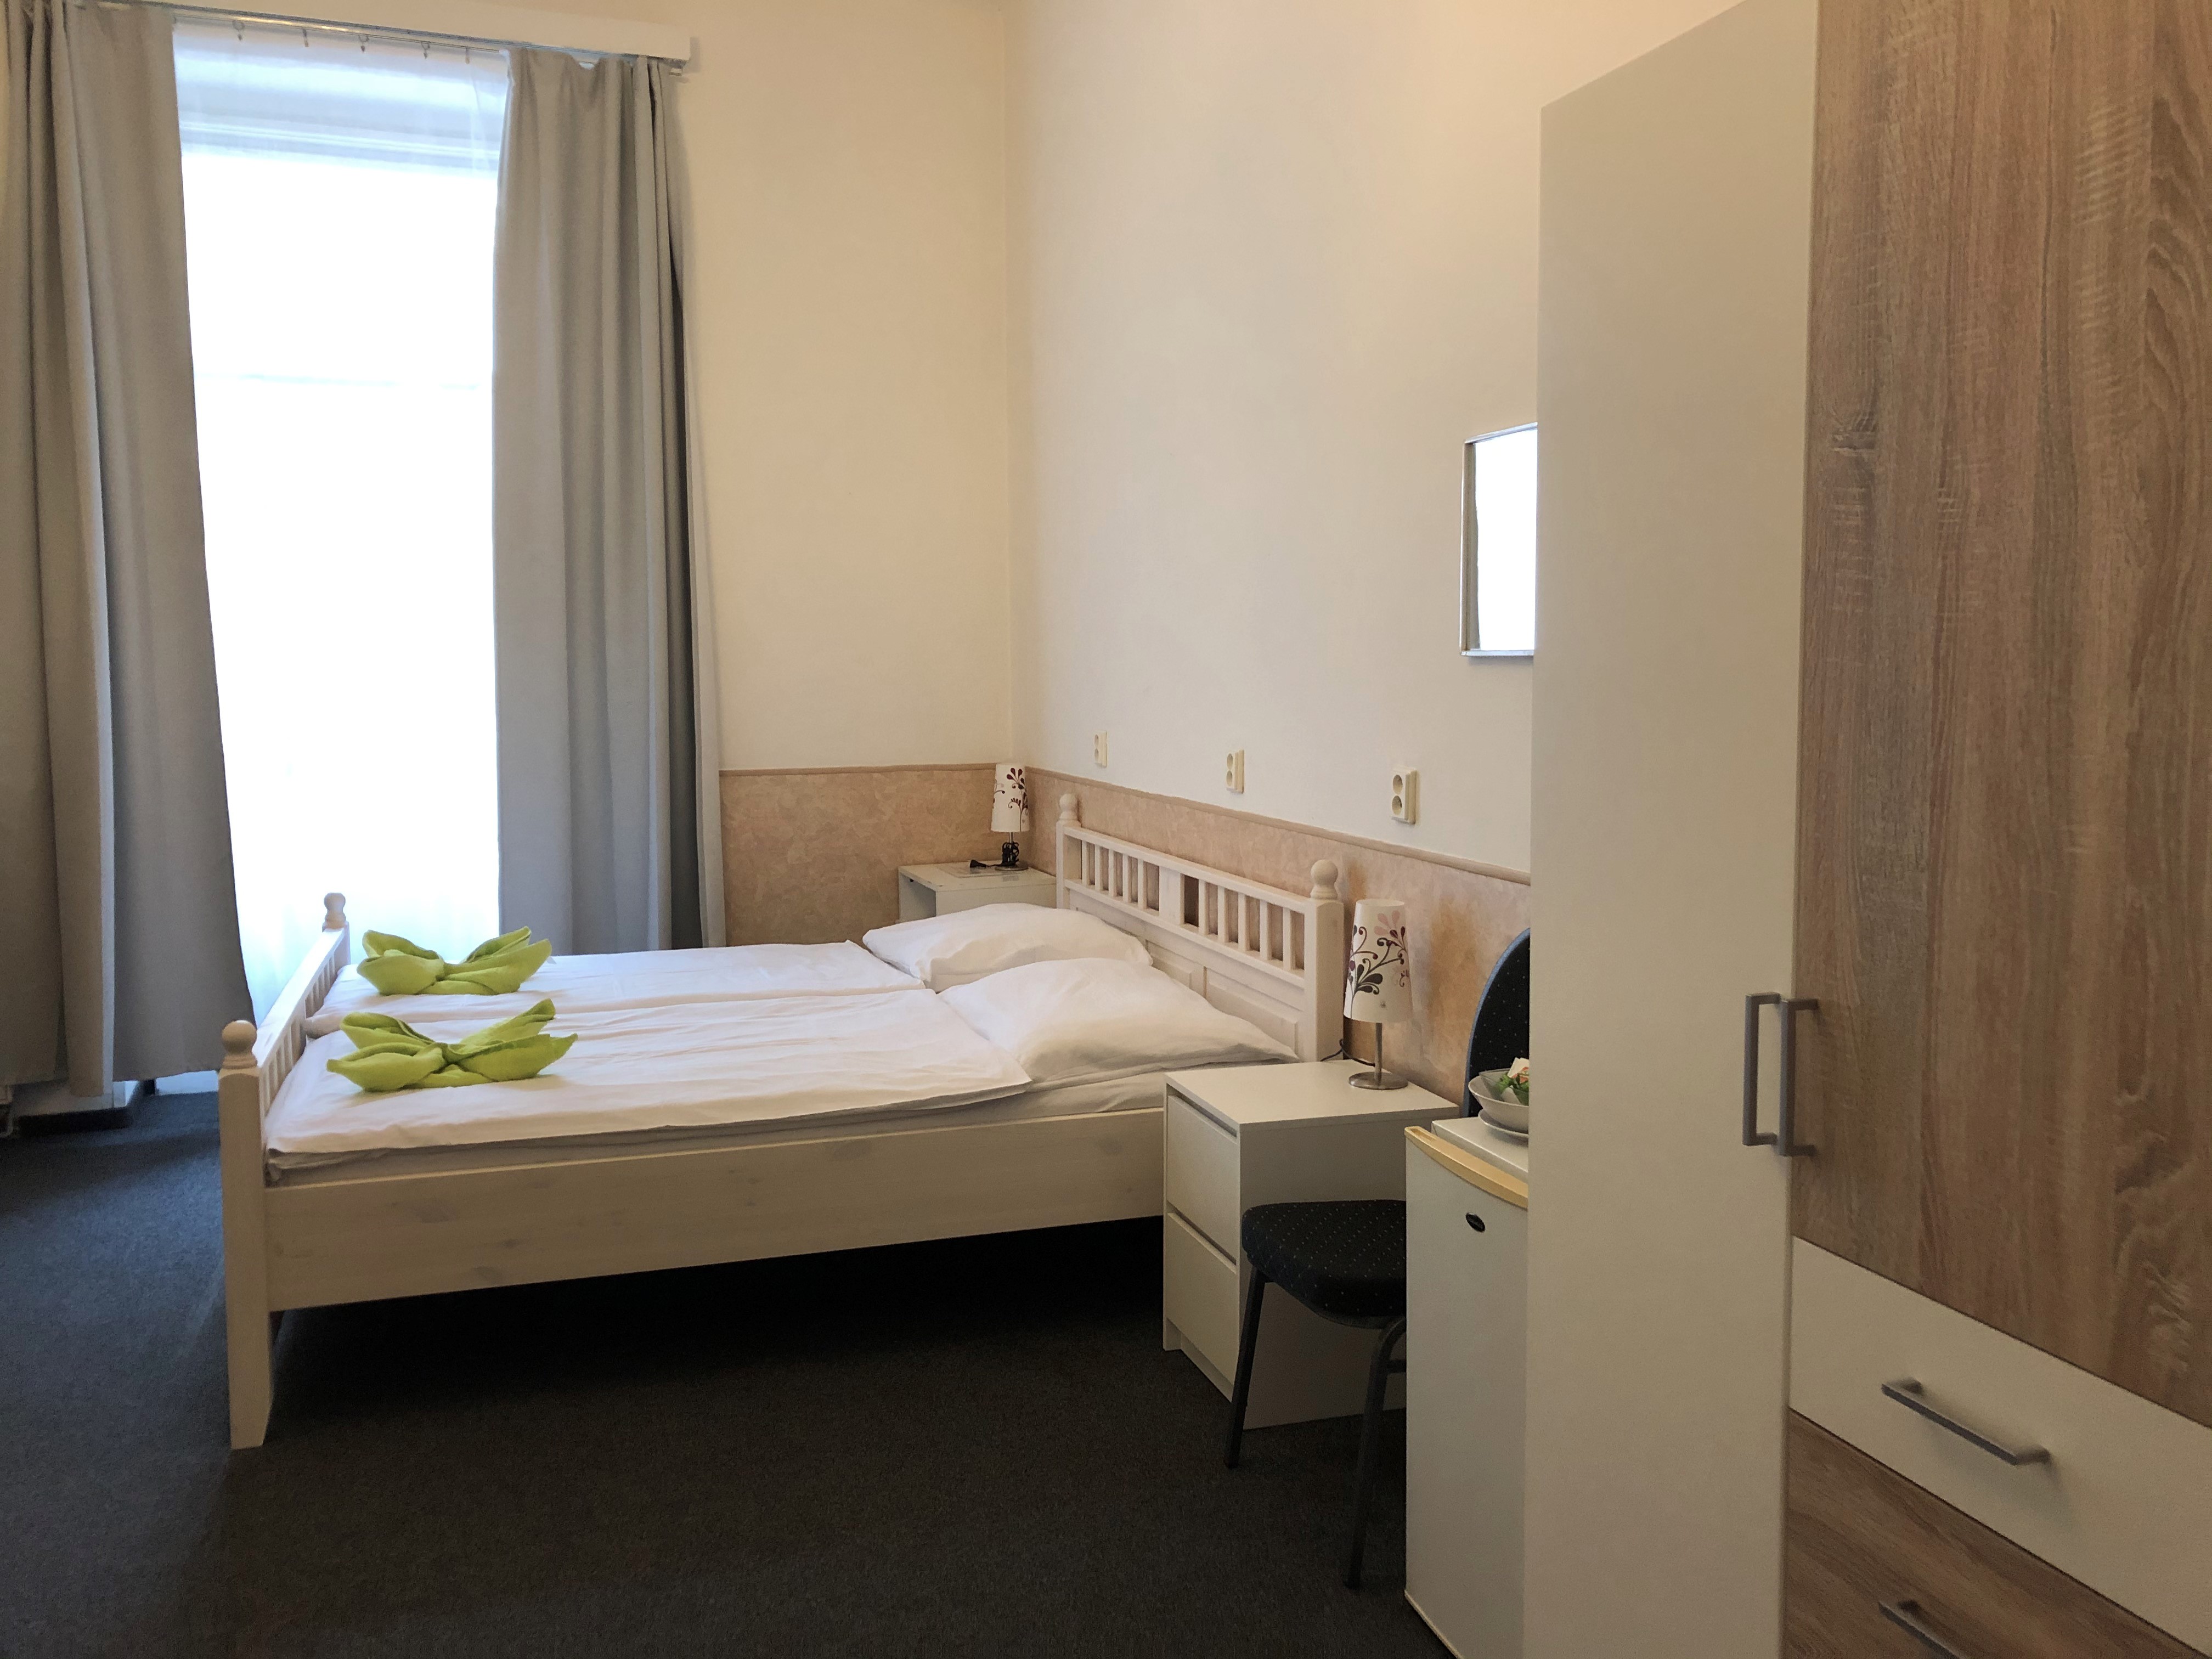 A double room with shared bathroom